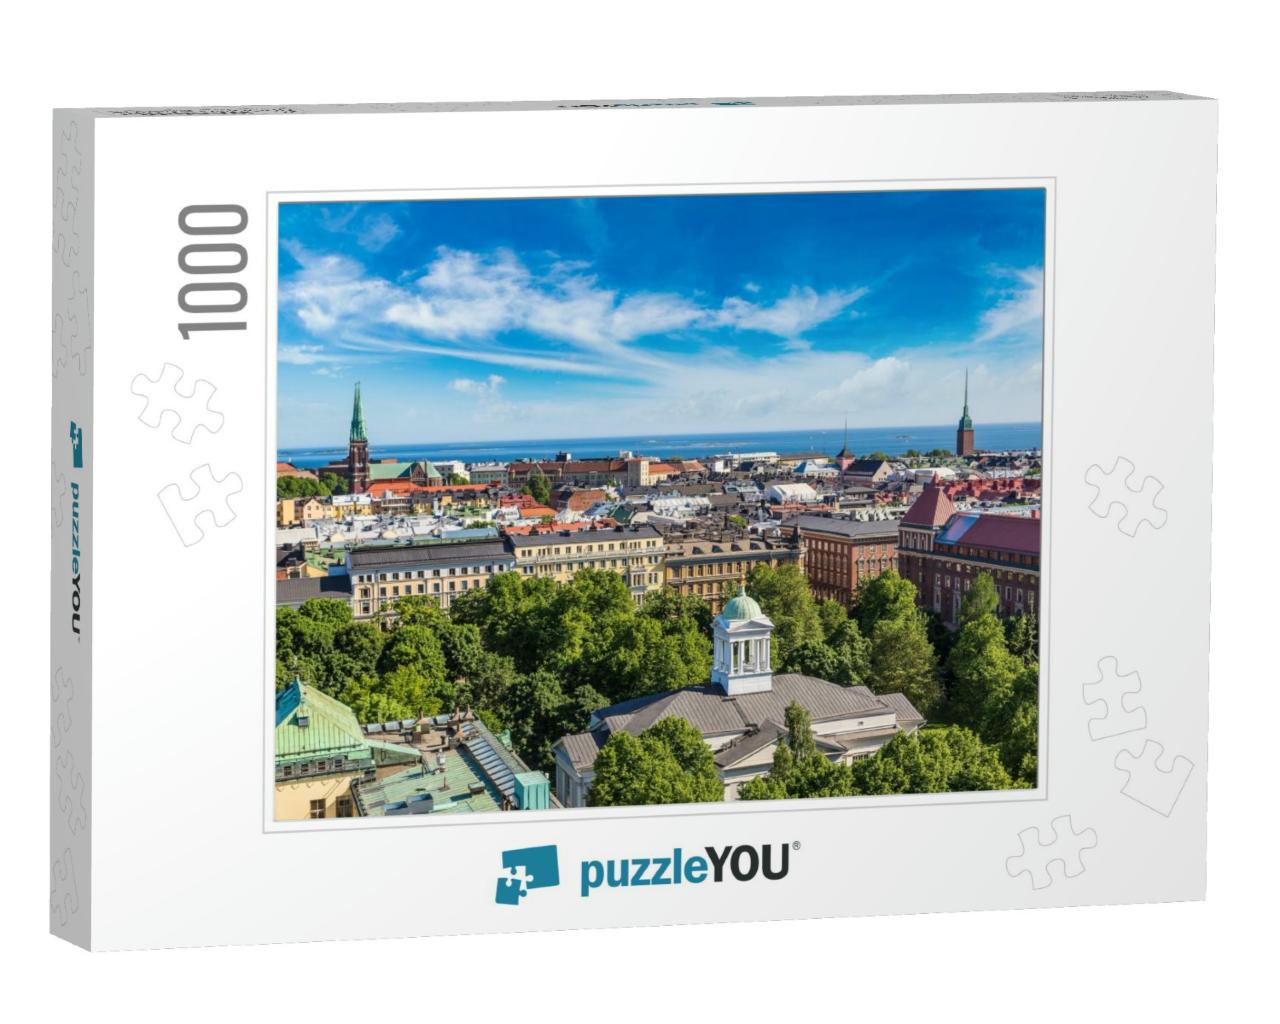 Panoramic Aerial View of Helsinki in a Beautiful Summer D... Jigsaw Puzzle with 1000 pieces